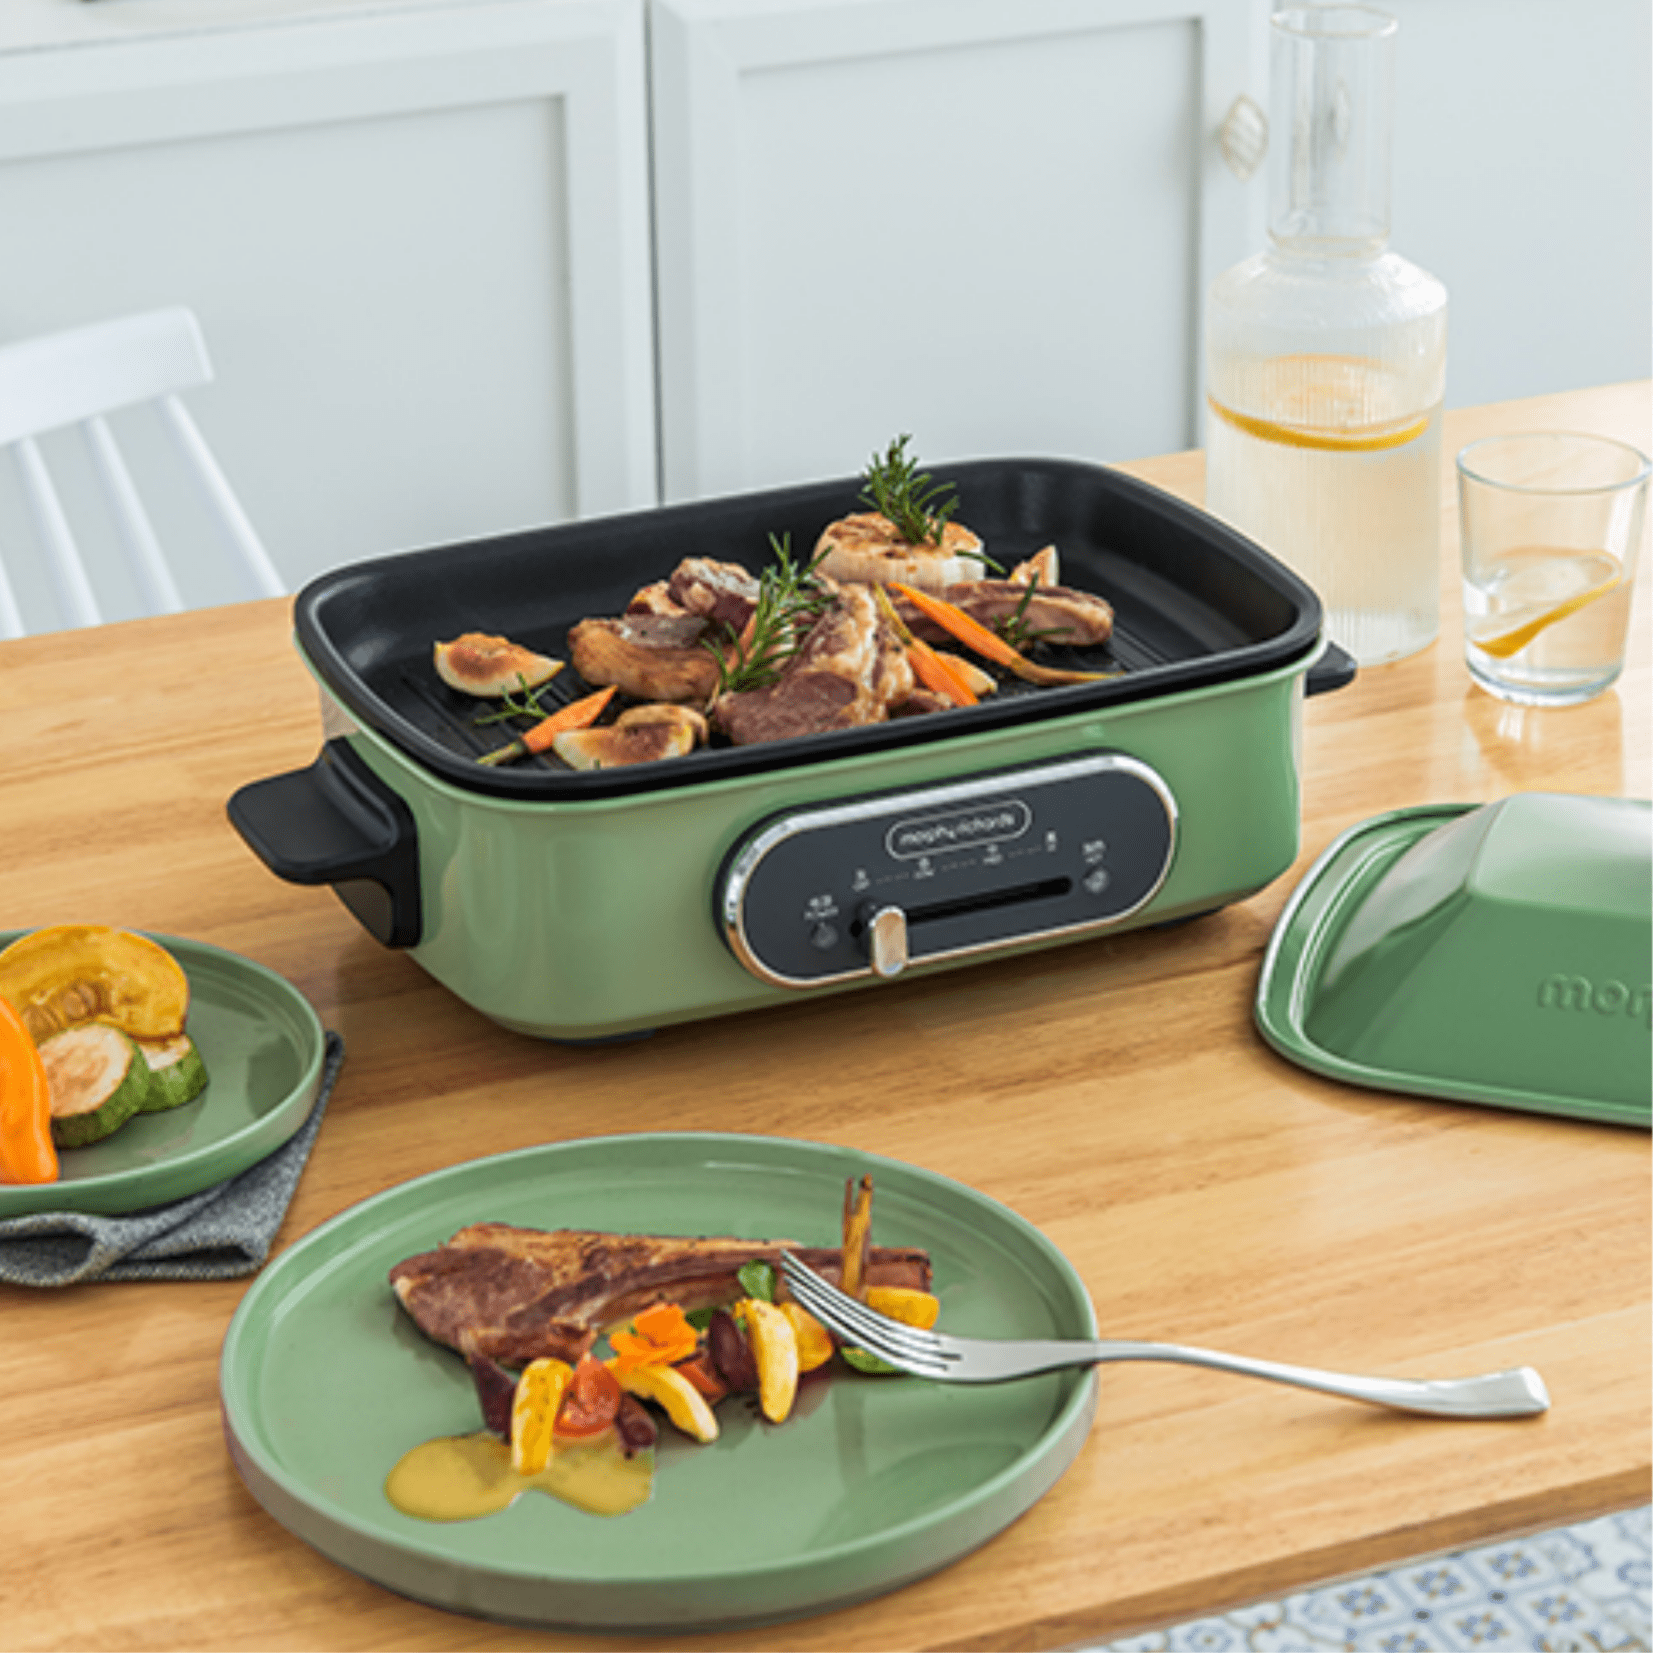 Morphy Richards Multicooker Non-Stick Material Hotpot BBQ Pan Grill - Evenly Heating | Easy Storage | Ergonomic Handled